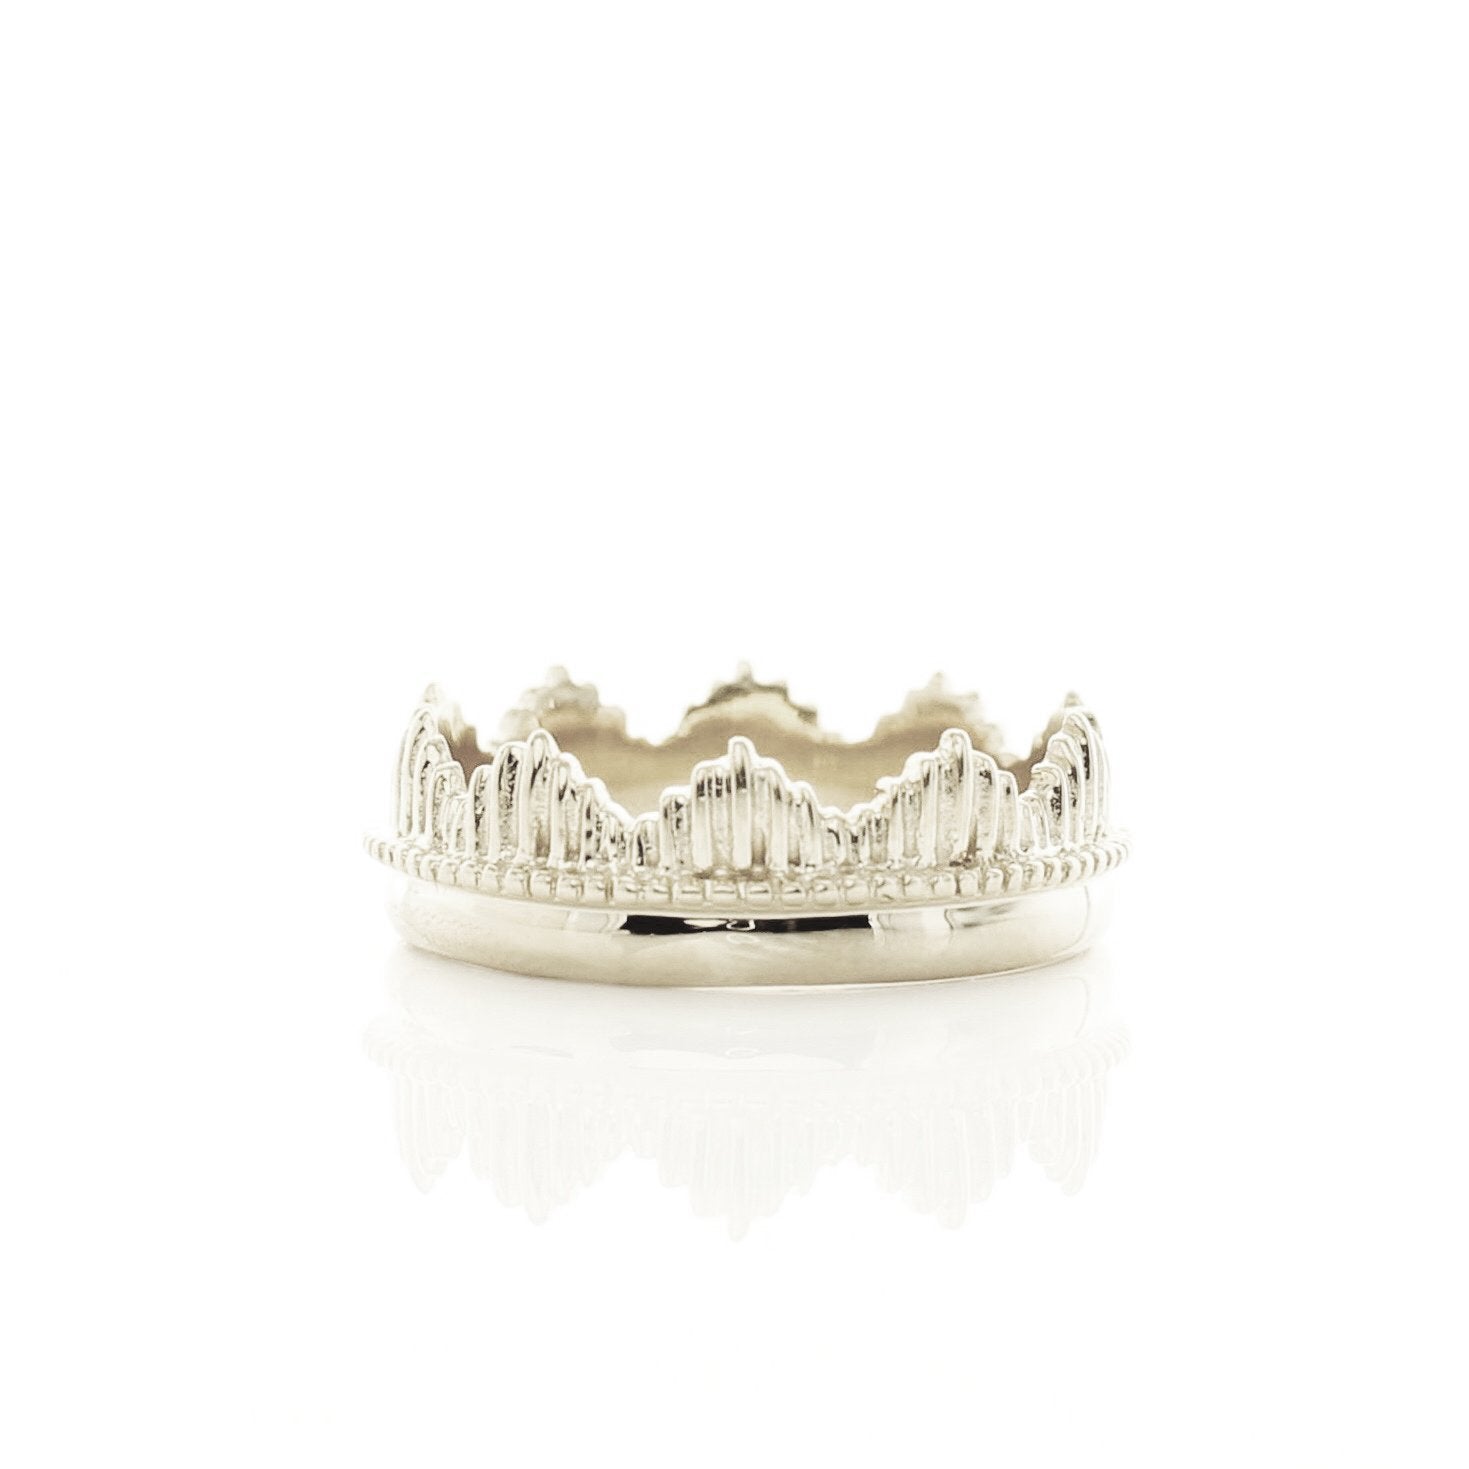 BELIEVE SOLEIL CROWN RING - SILVER - SO PRETTY CARA COTTER